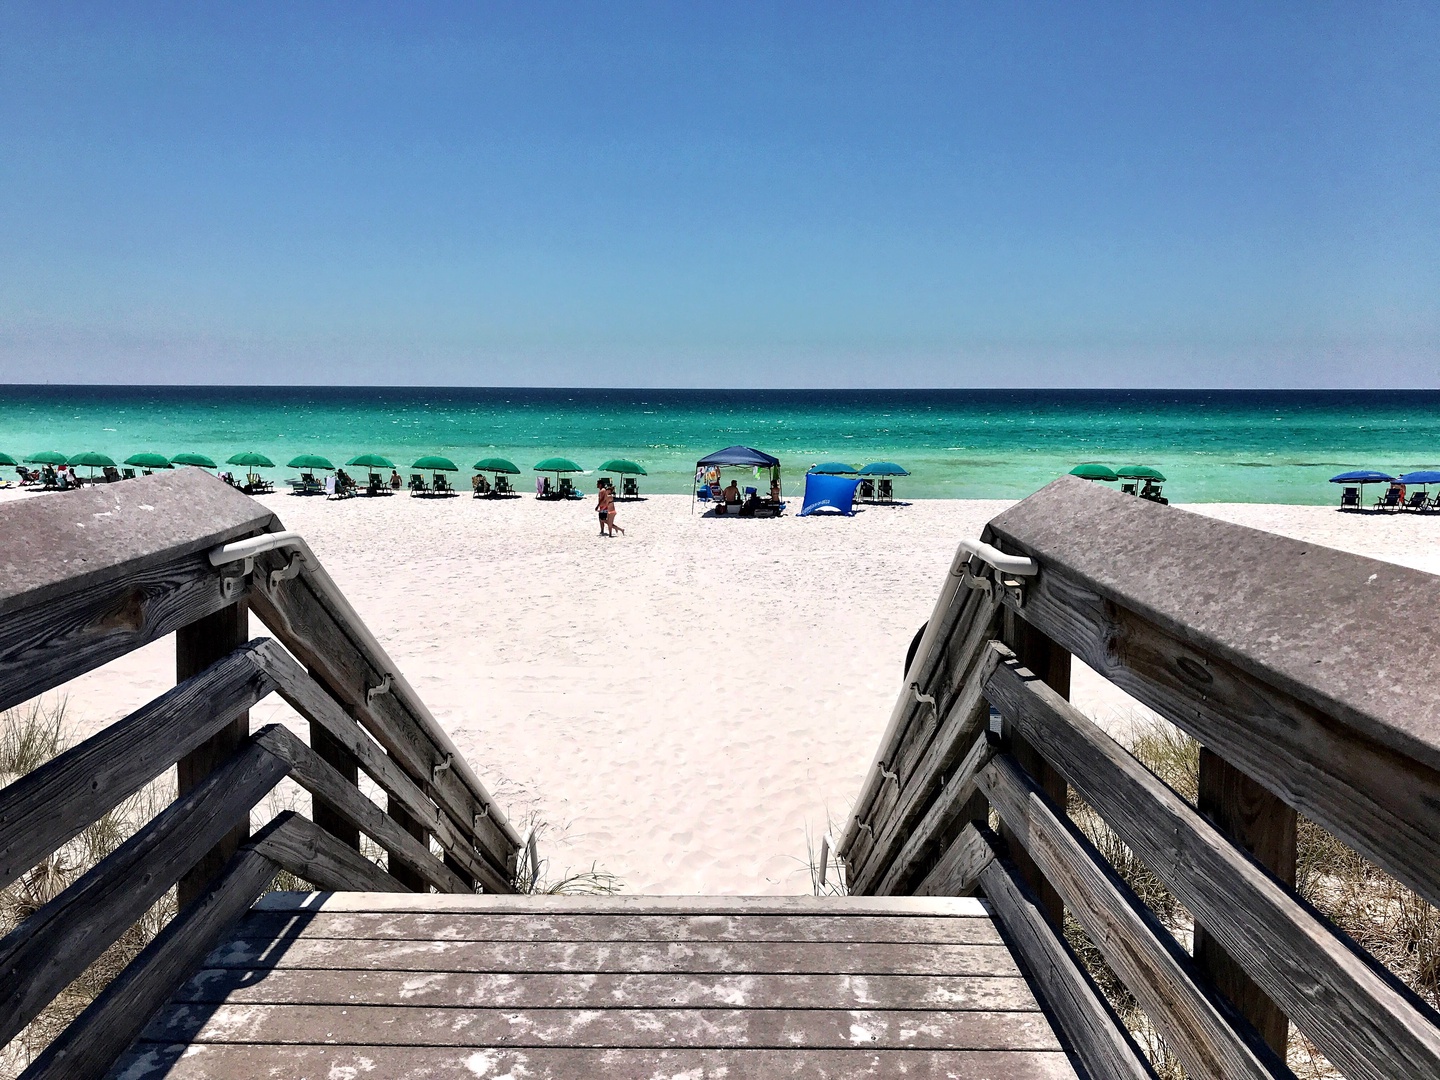 Emerald waters and sugar-white sand beaches are only a half mile from the neighborhood!